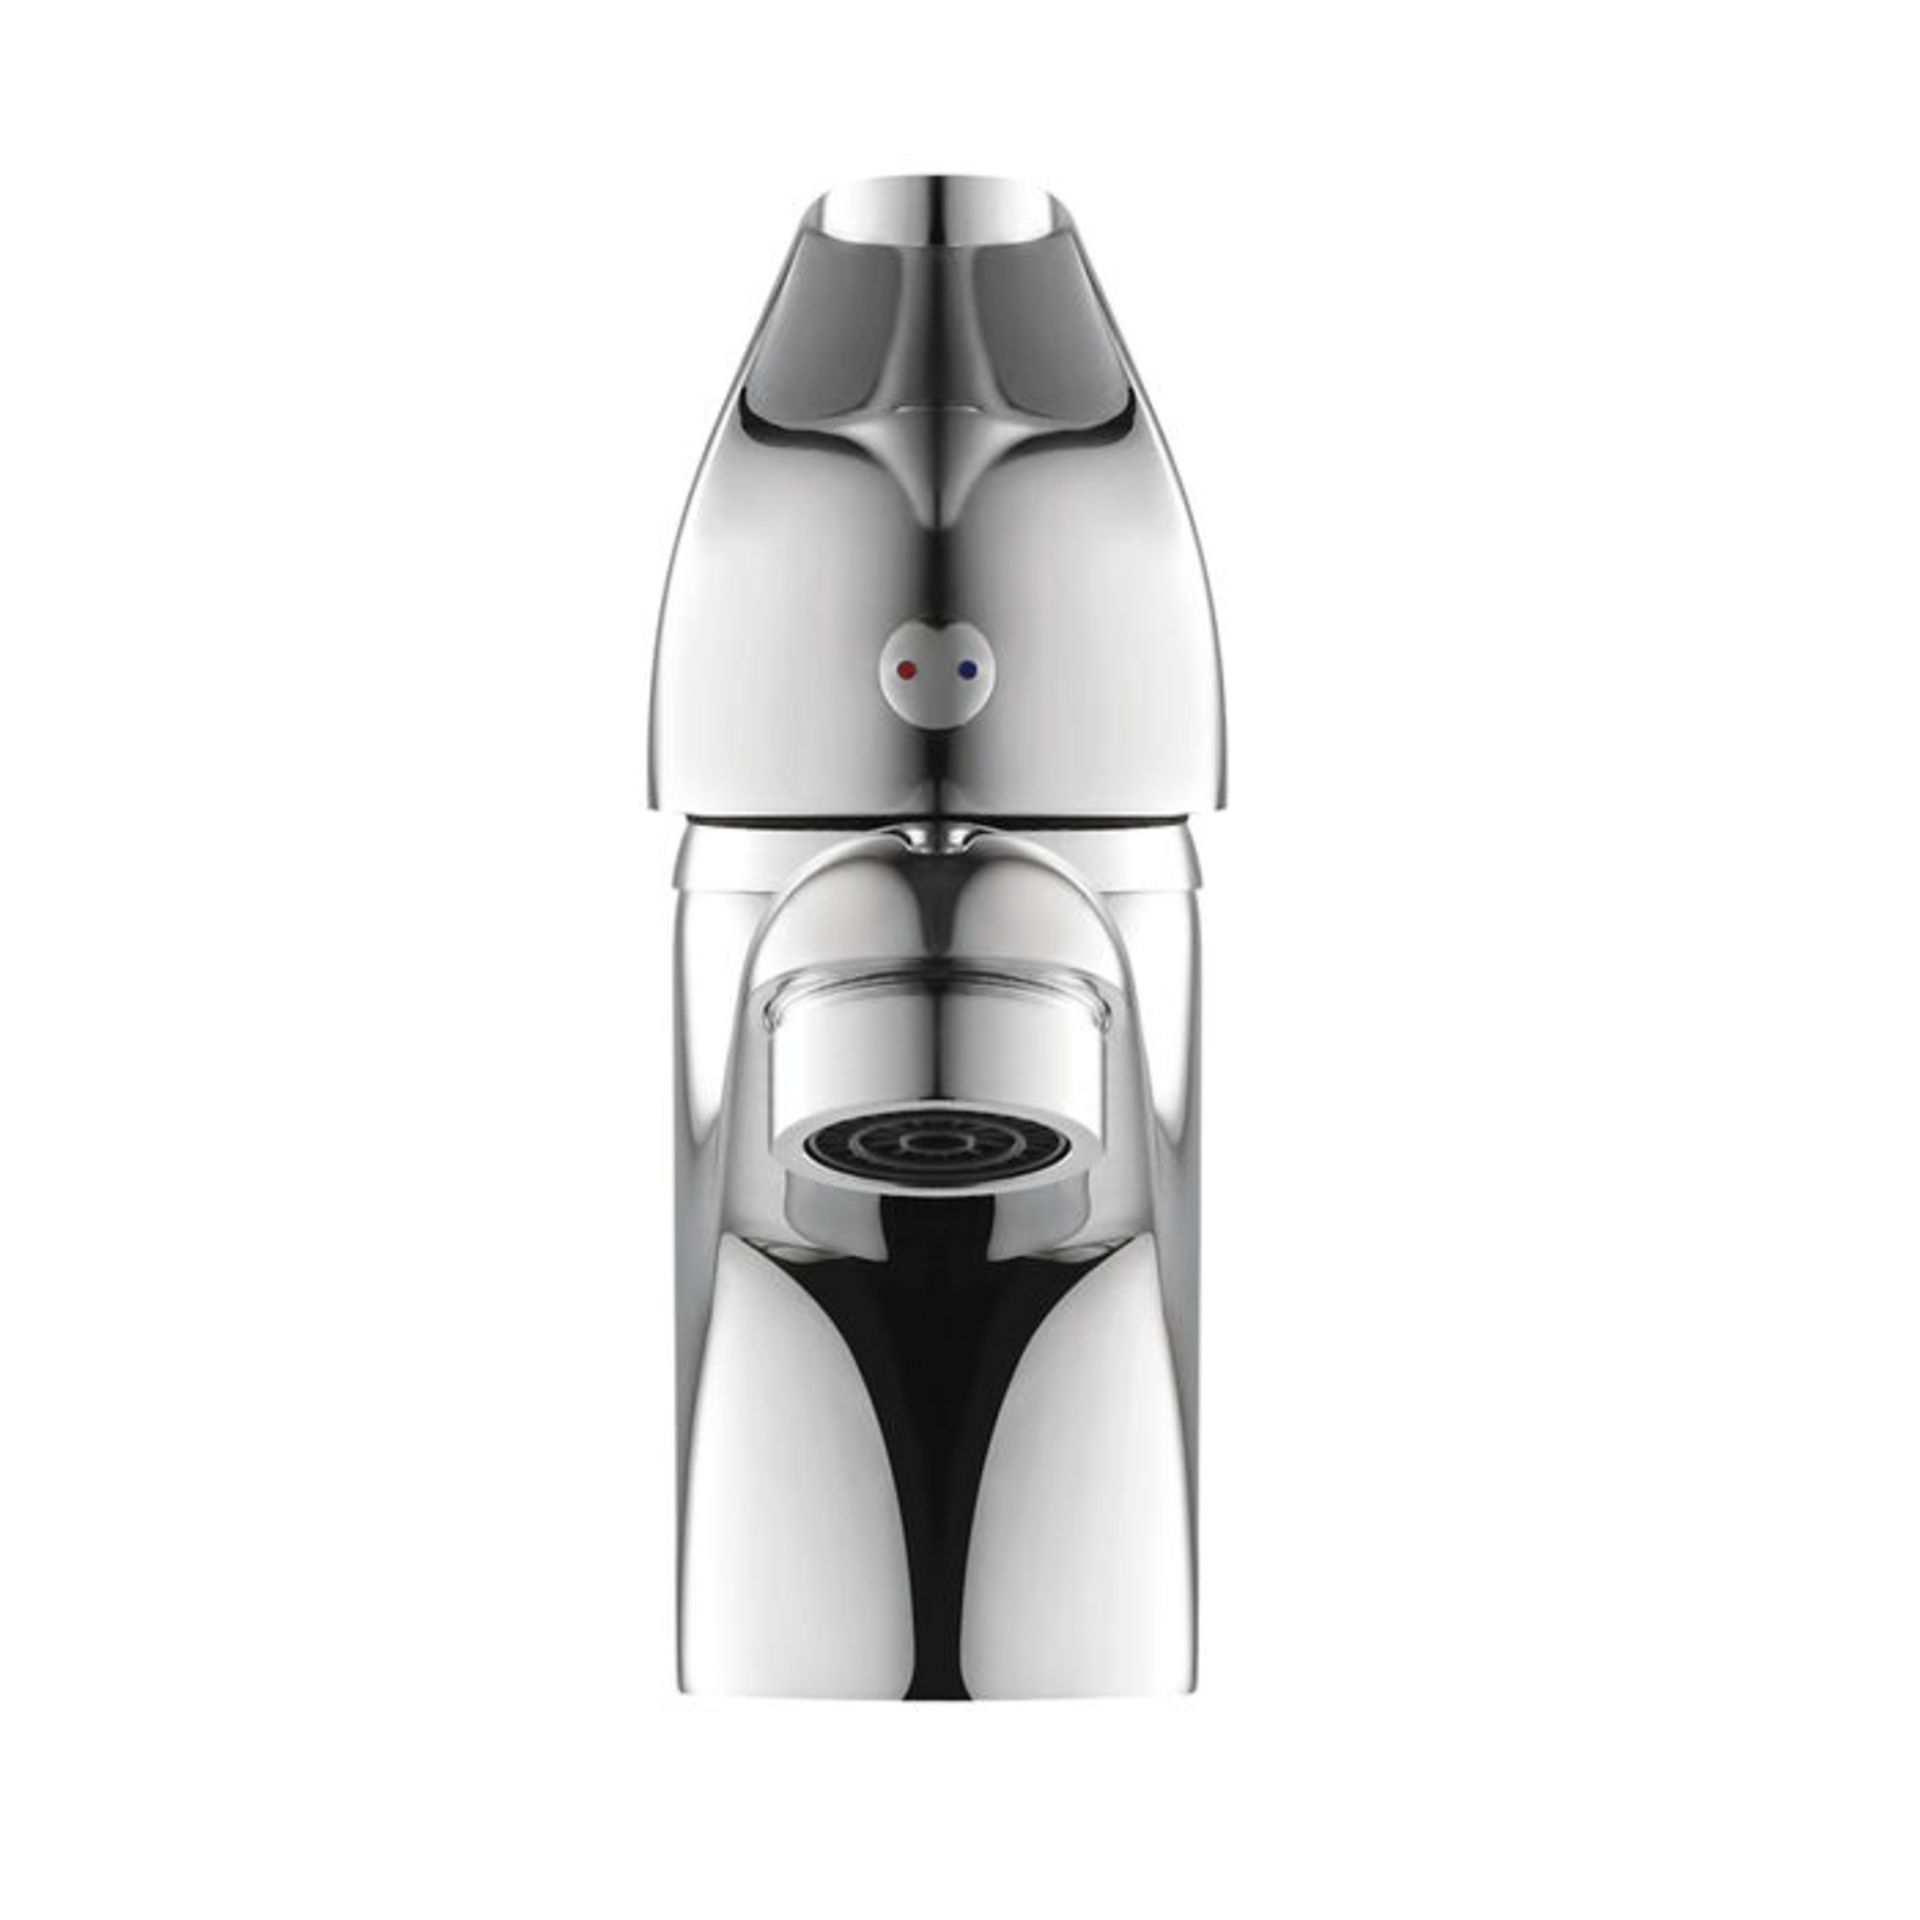 (RK1033) Sleek Sink Mixer Tap. Engineered from solid brass which is layered in a chrome finish ... - Image 2 of 2